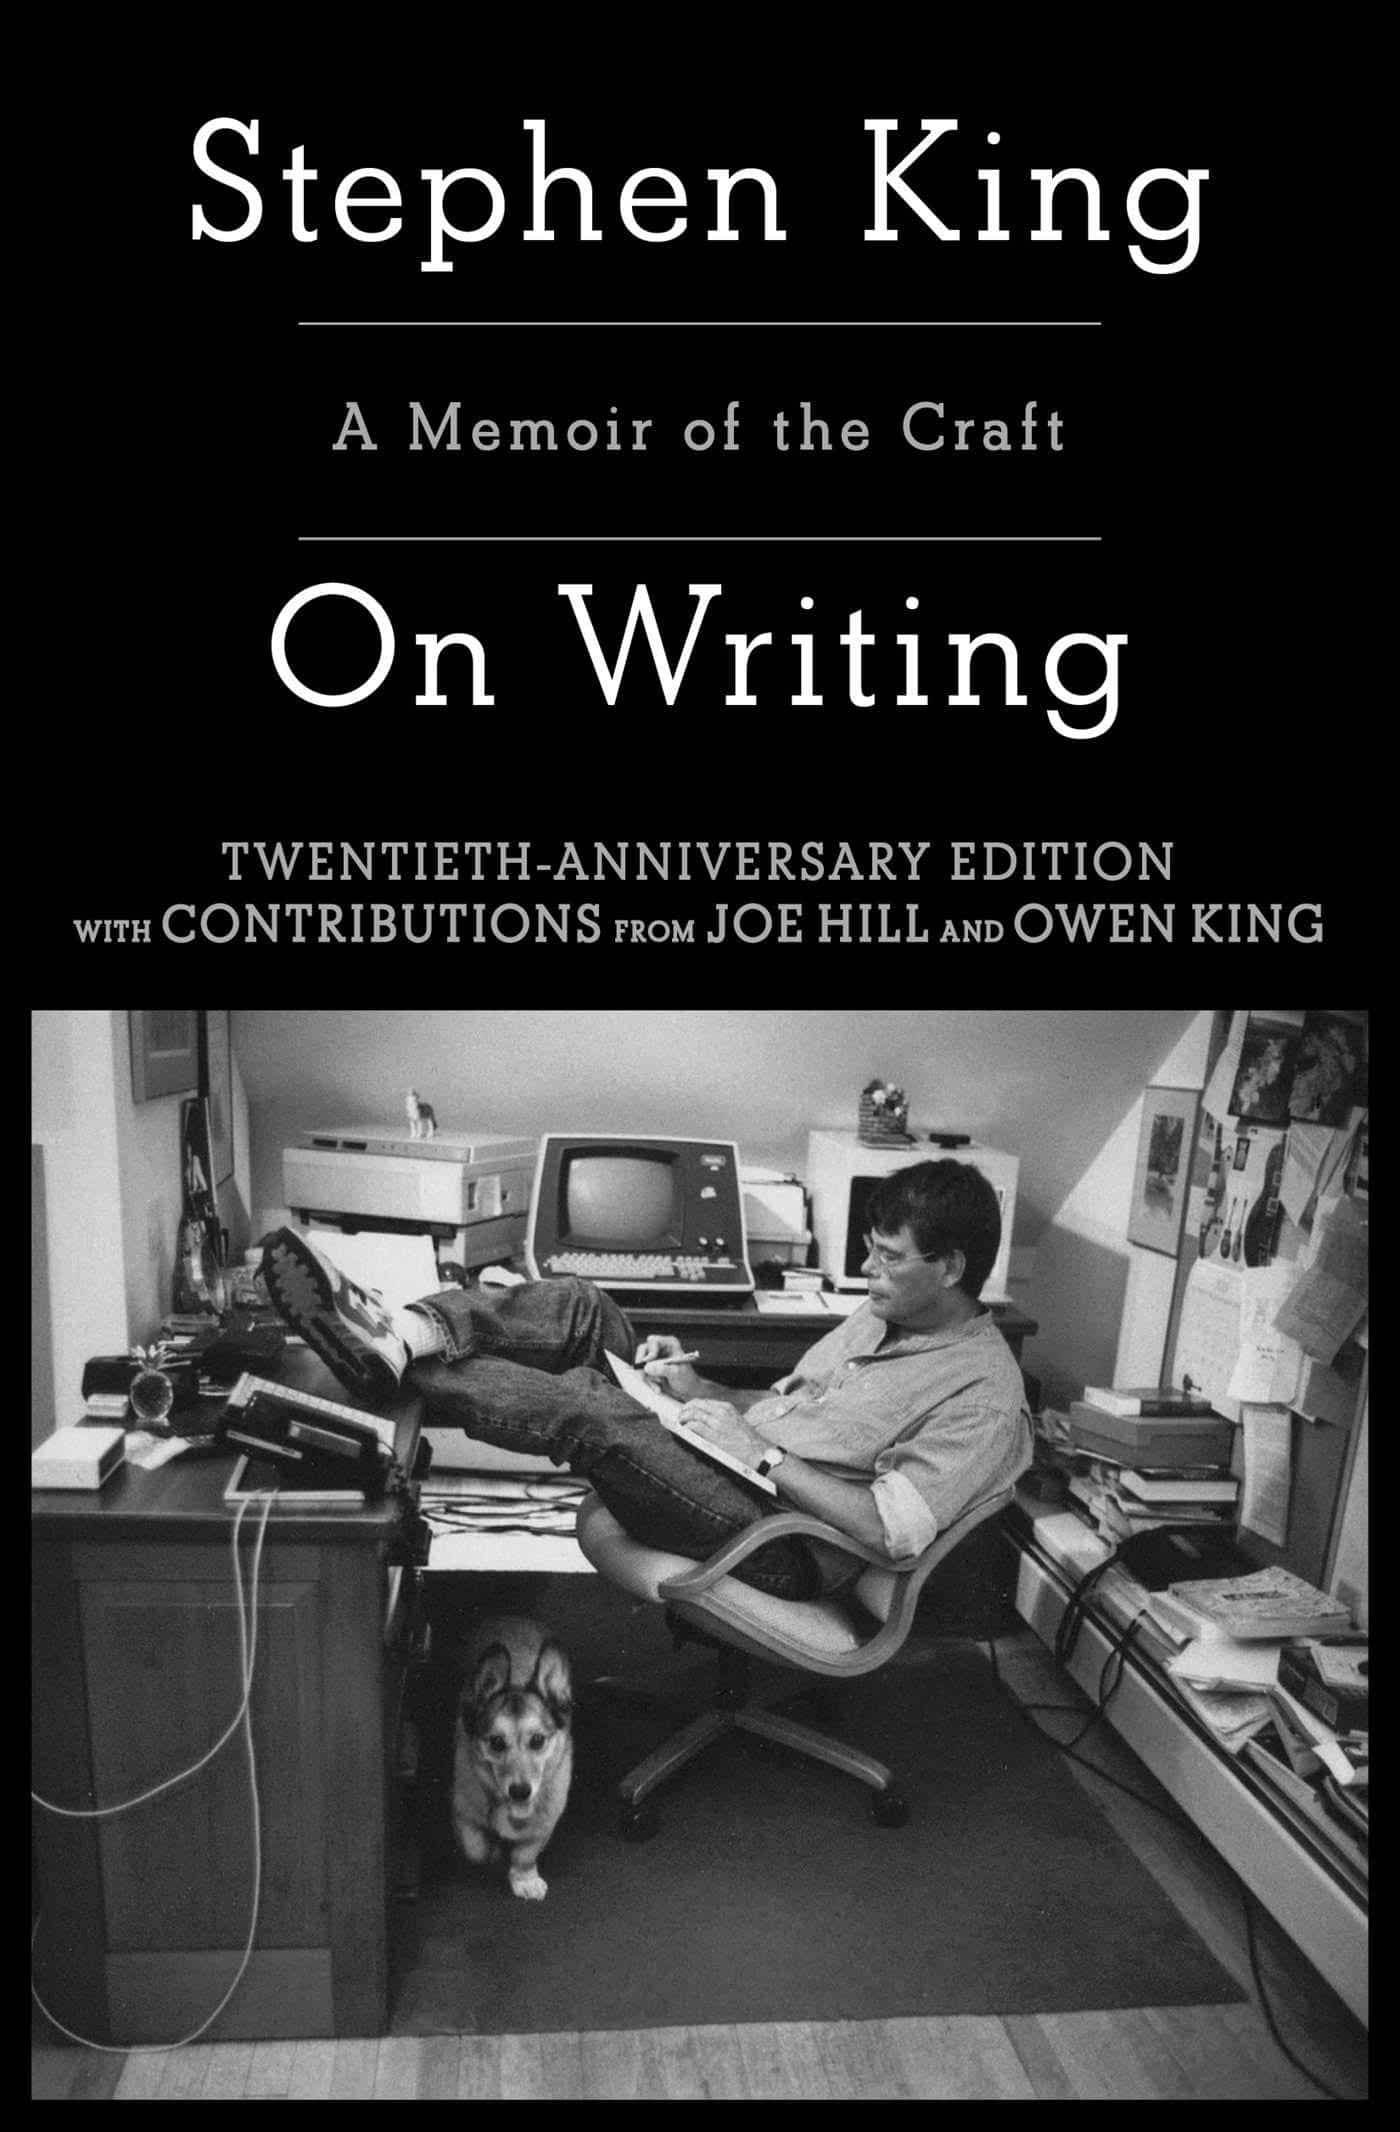 The cover of On Writing